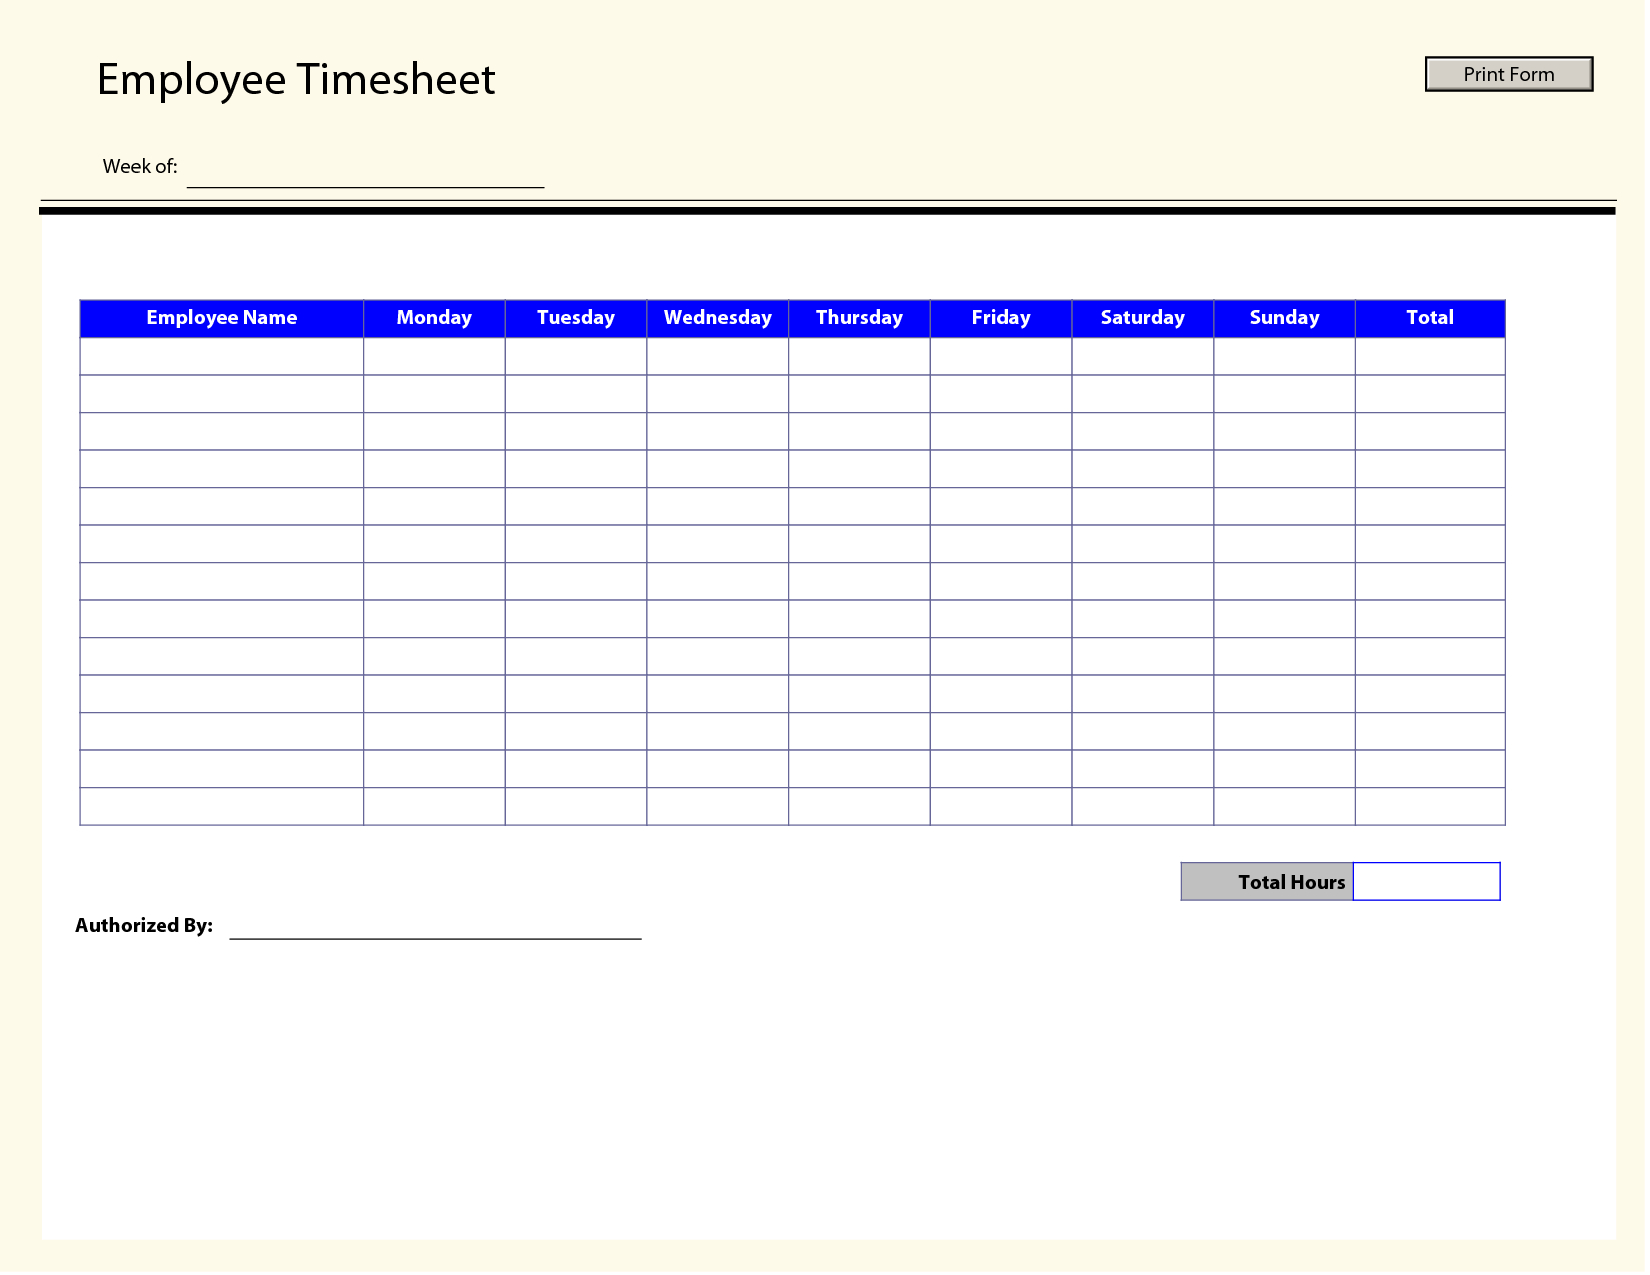 Blank Employee Timesheet Template | Management Templates | Pinterest - Free Printable Time Sheets Forms